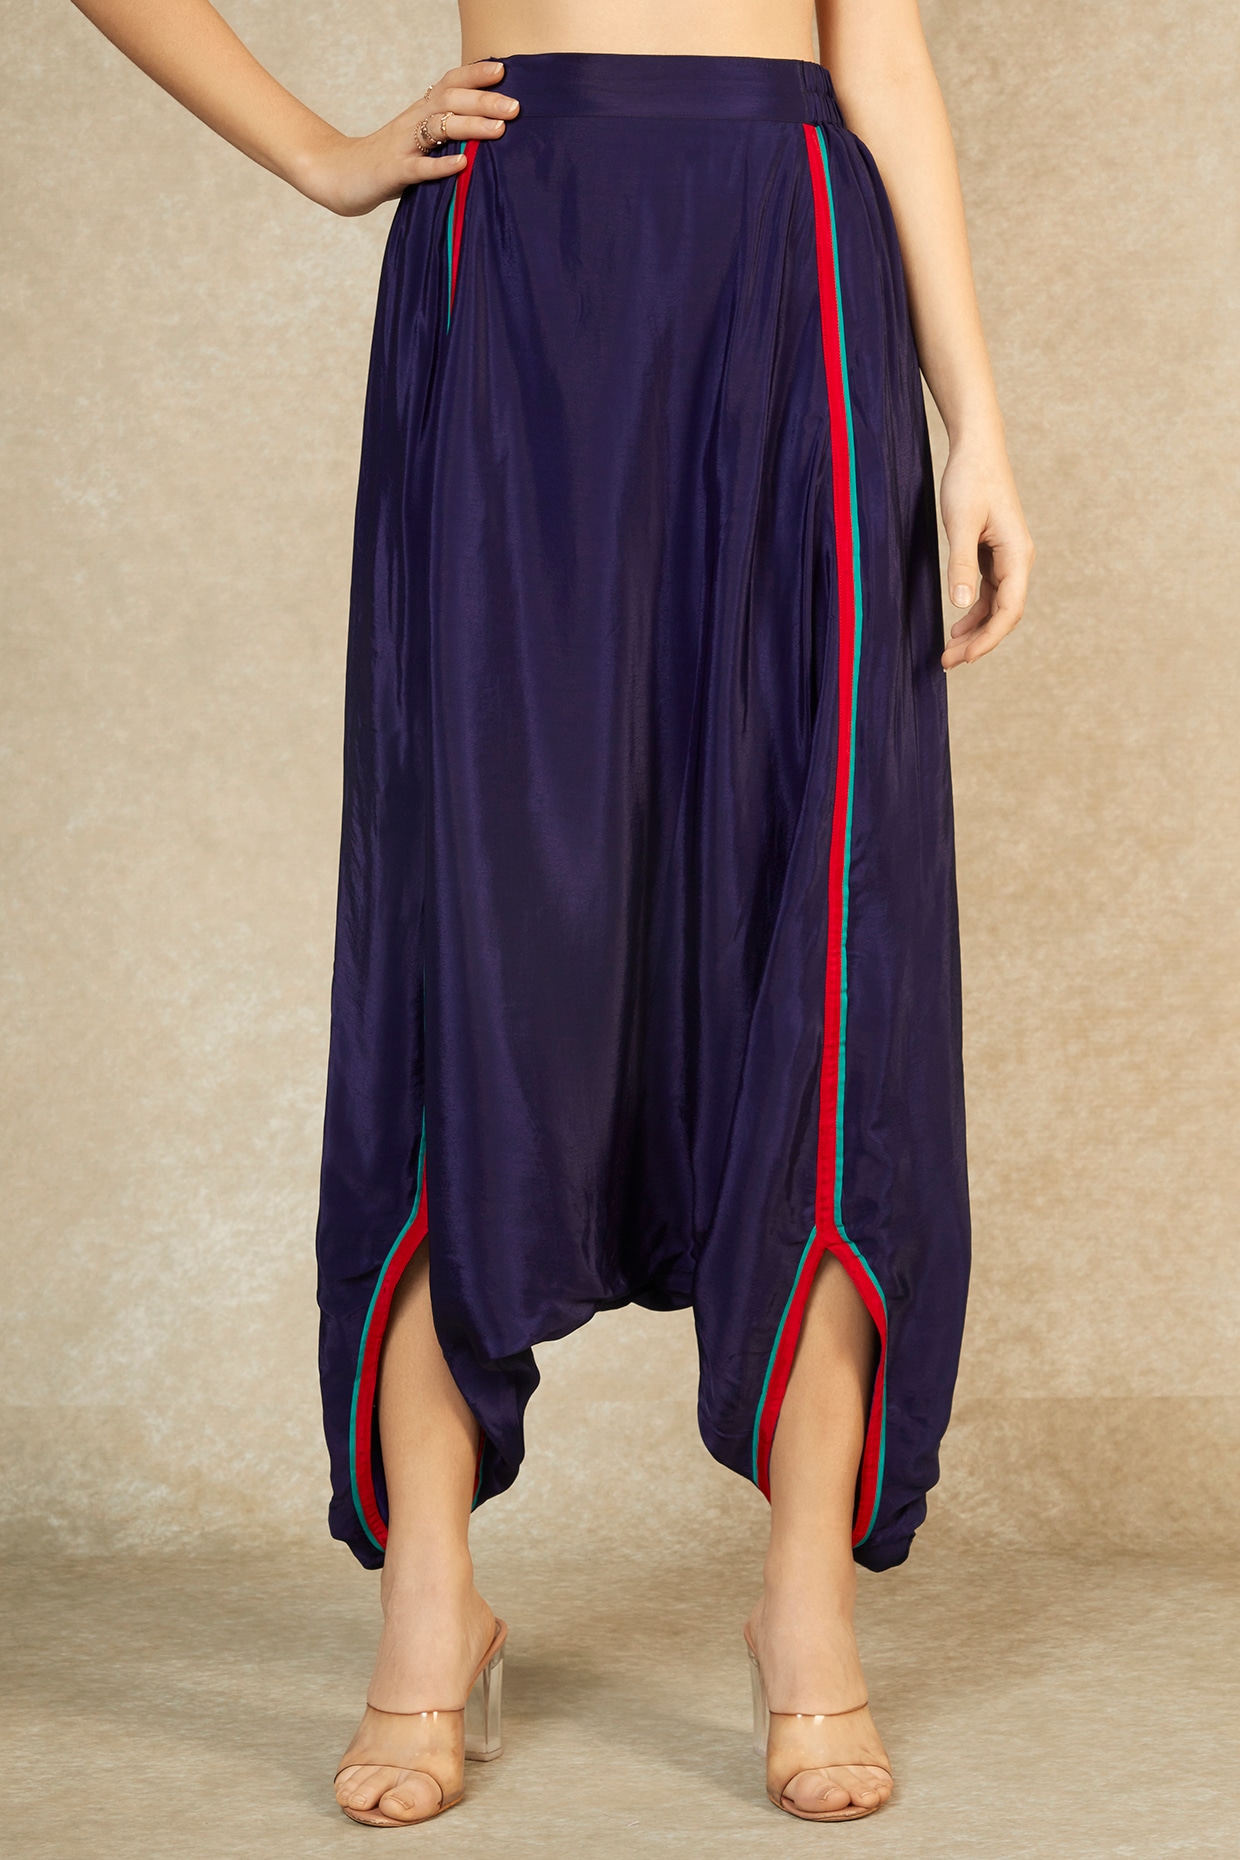 Midnight Blue Short Tunic & Drop Crotch Pants Design by Wendell 